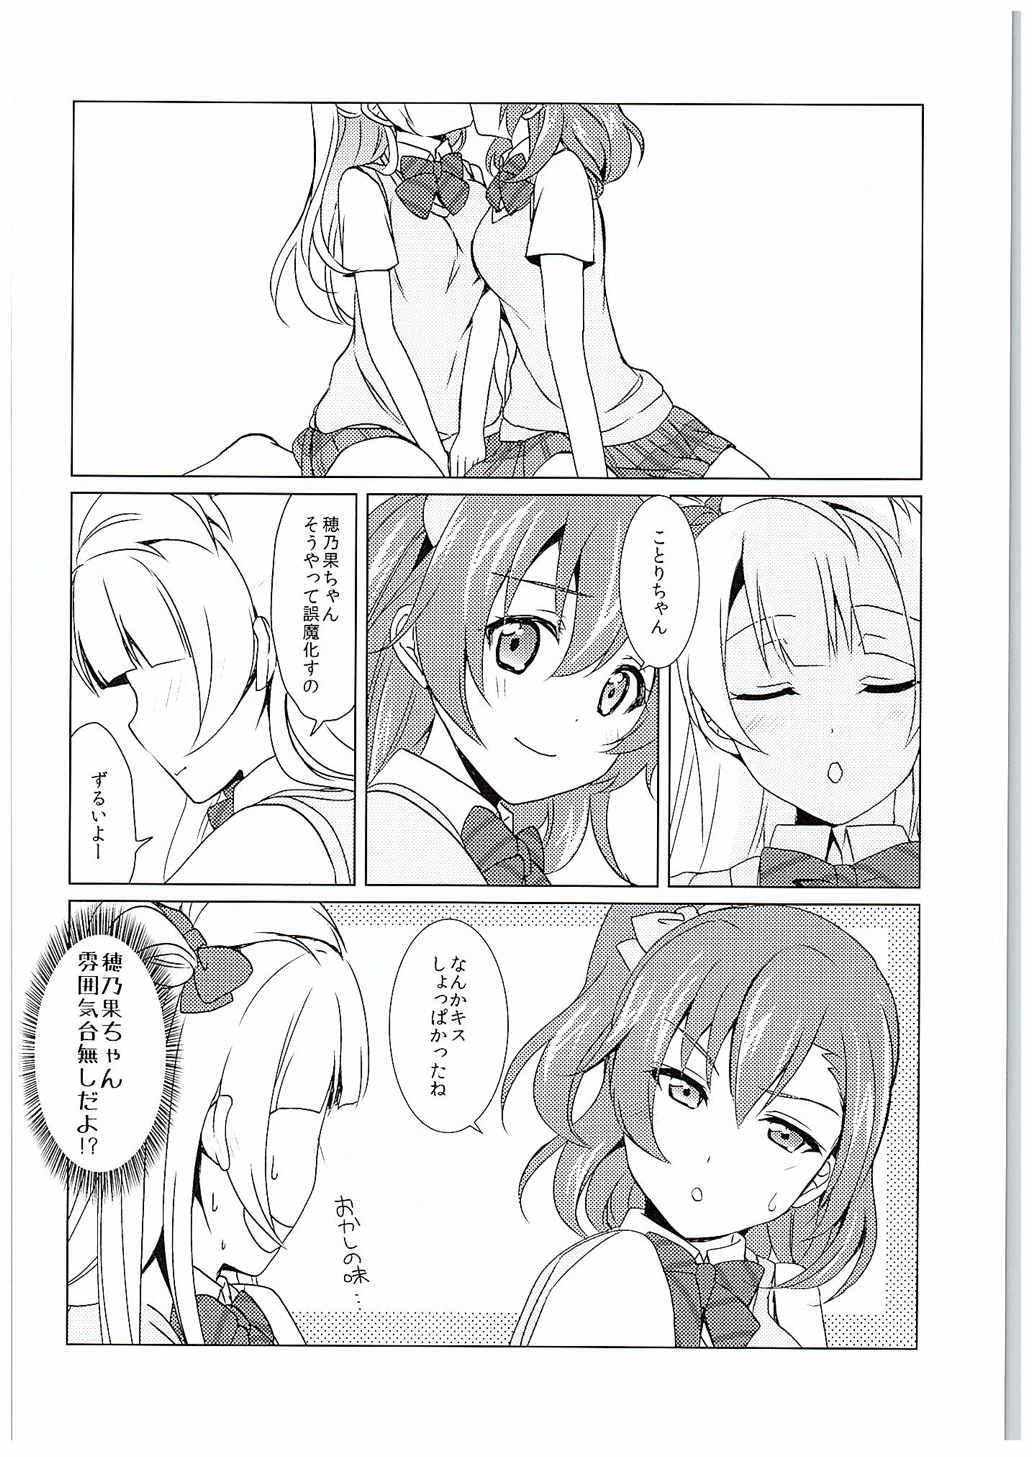 Best Blowjob µ'2 ←Counterattack - Love live Shesafreak - Page 7